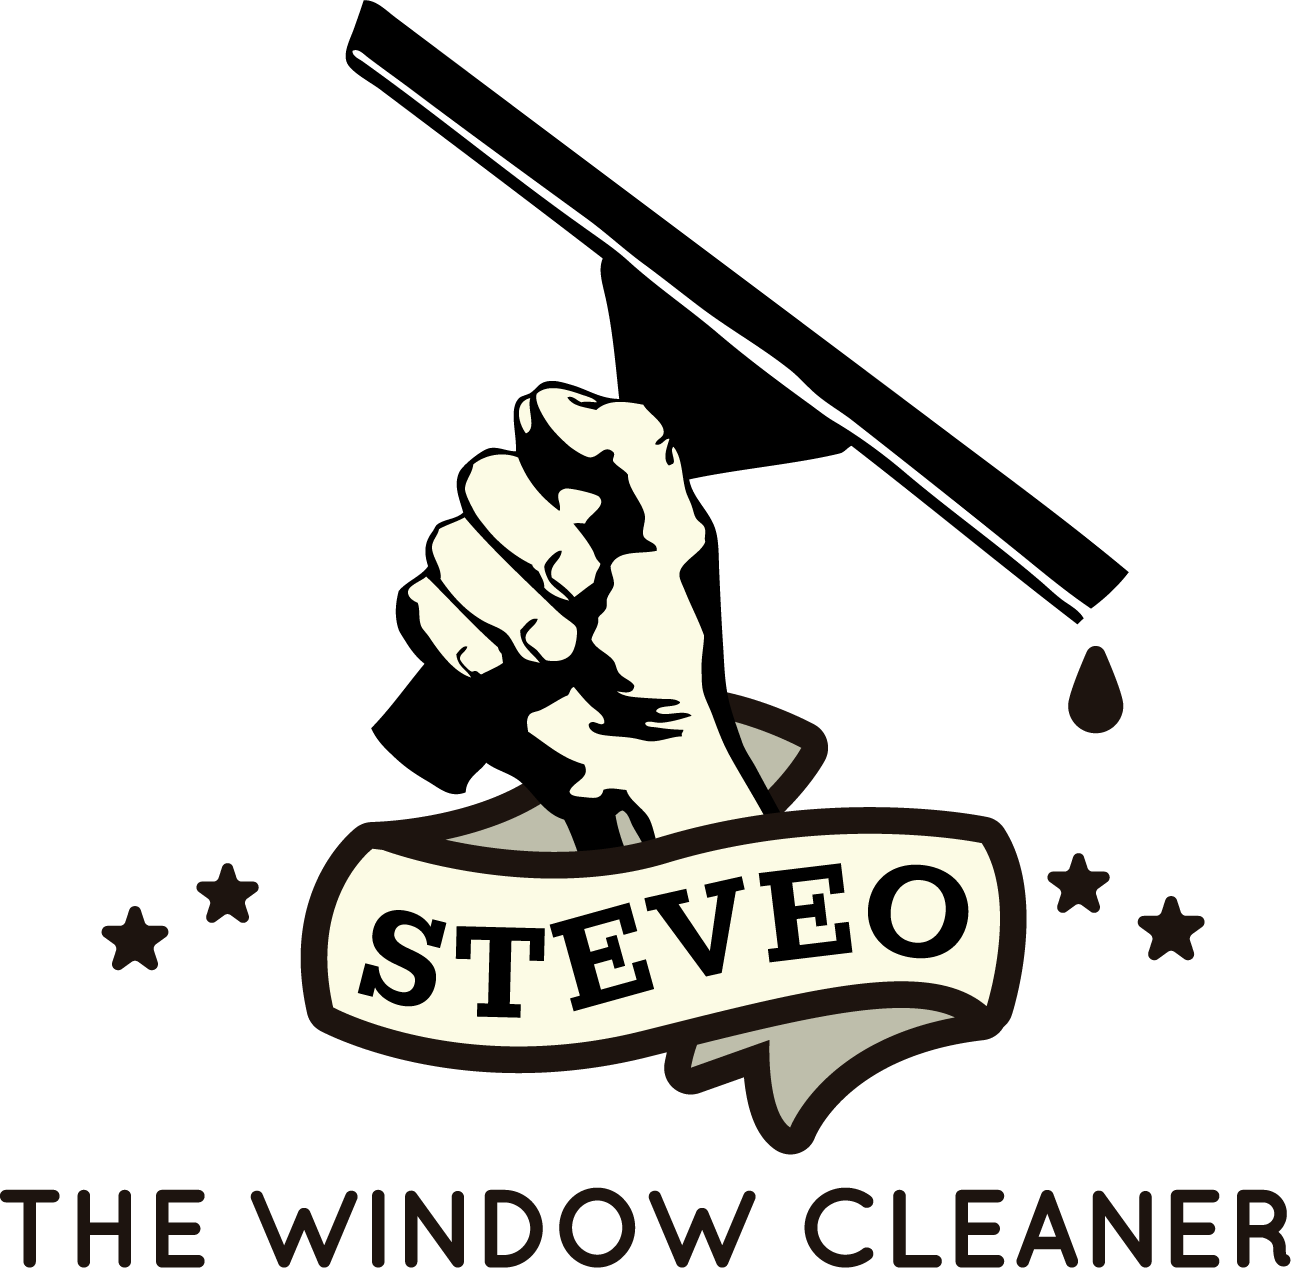 Lavex Complete Window Cleaning Kit